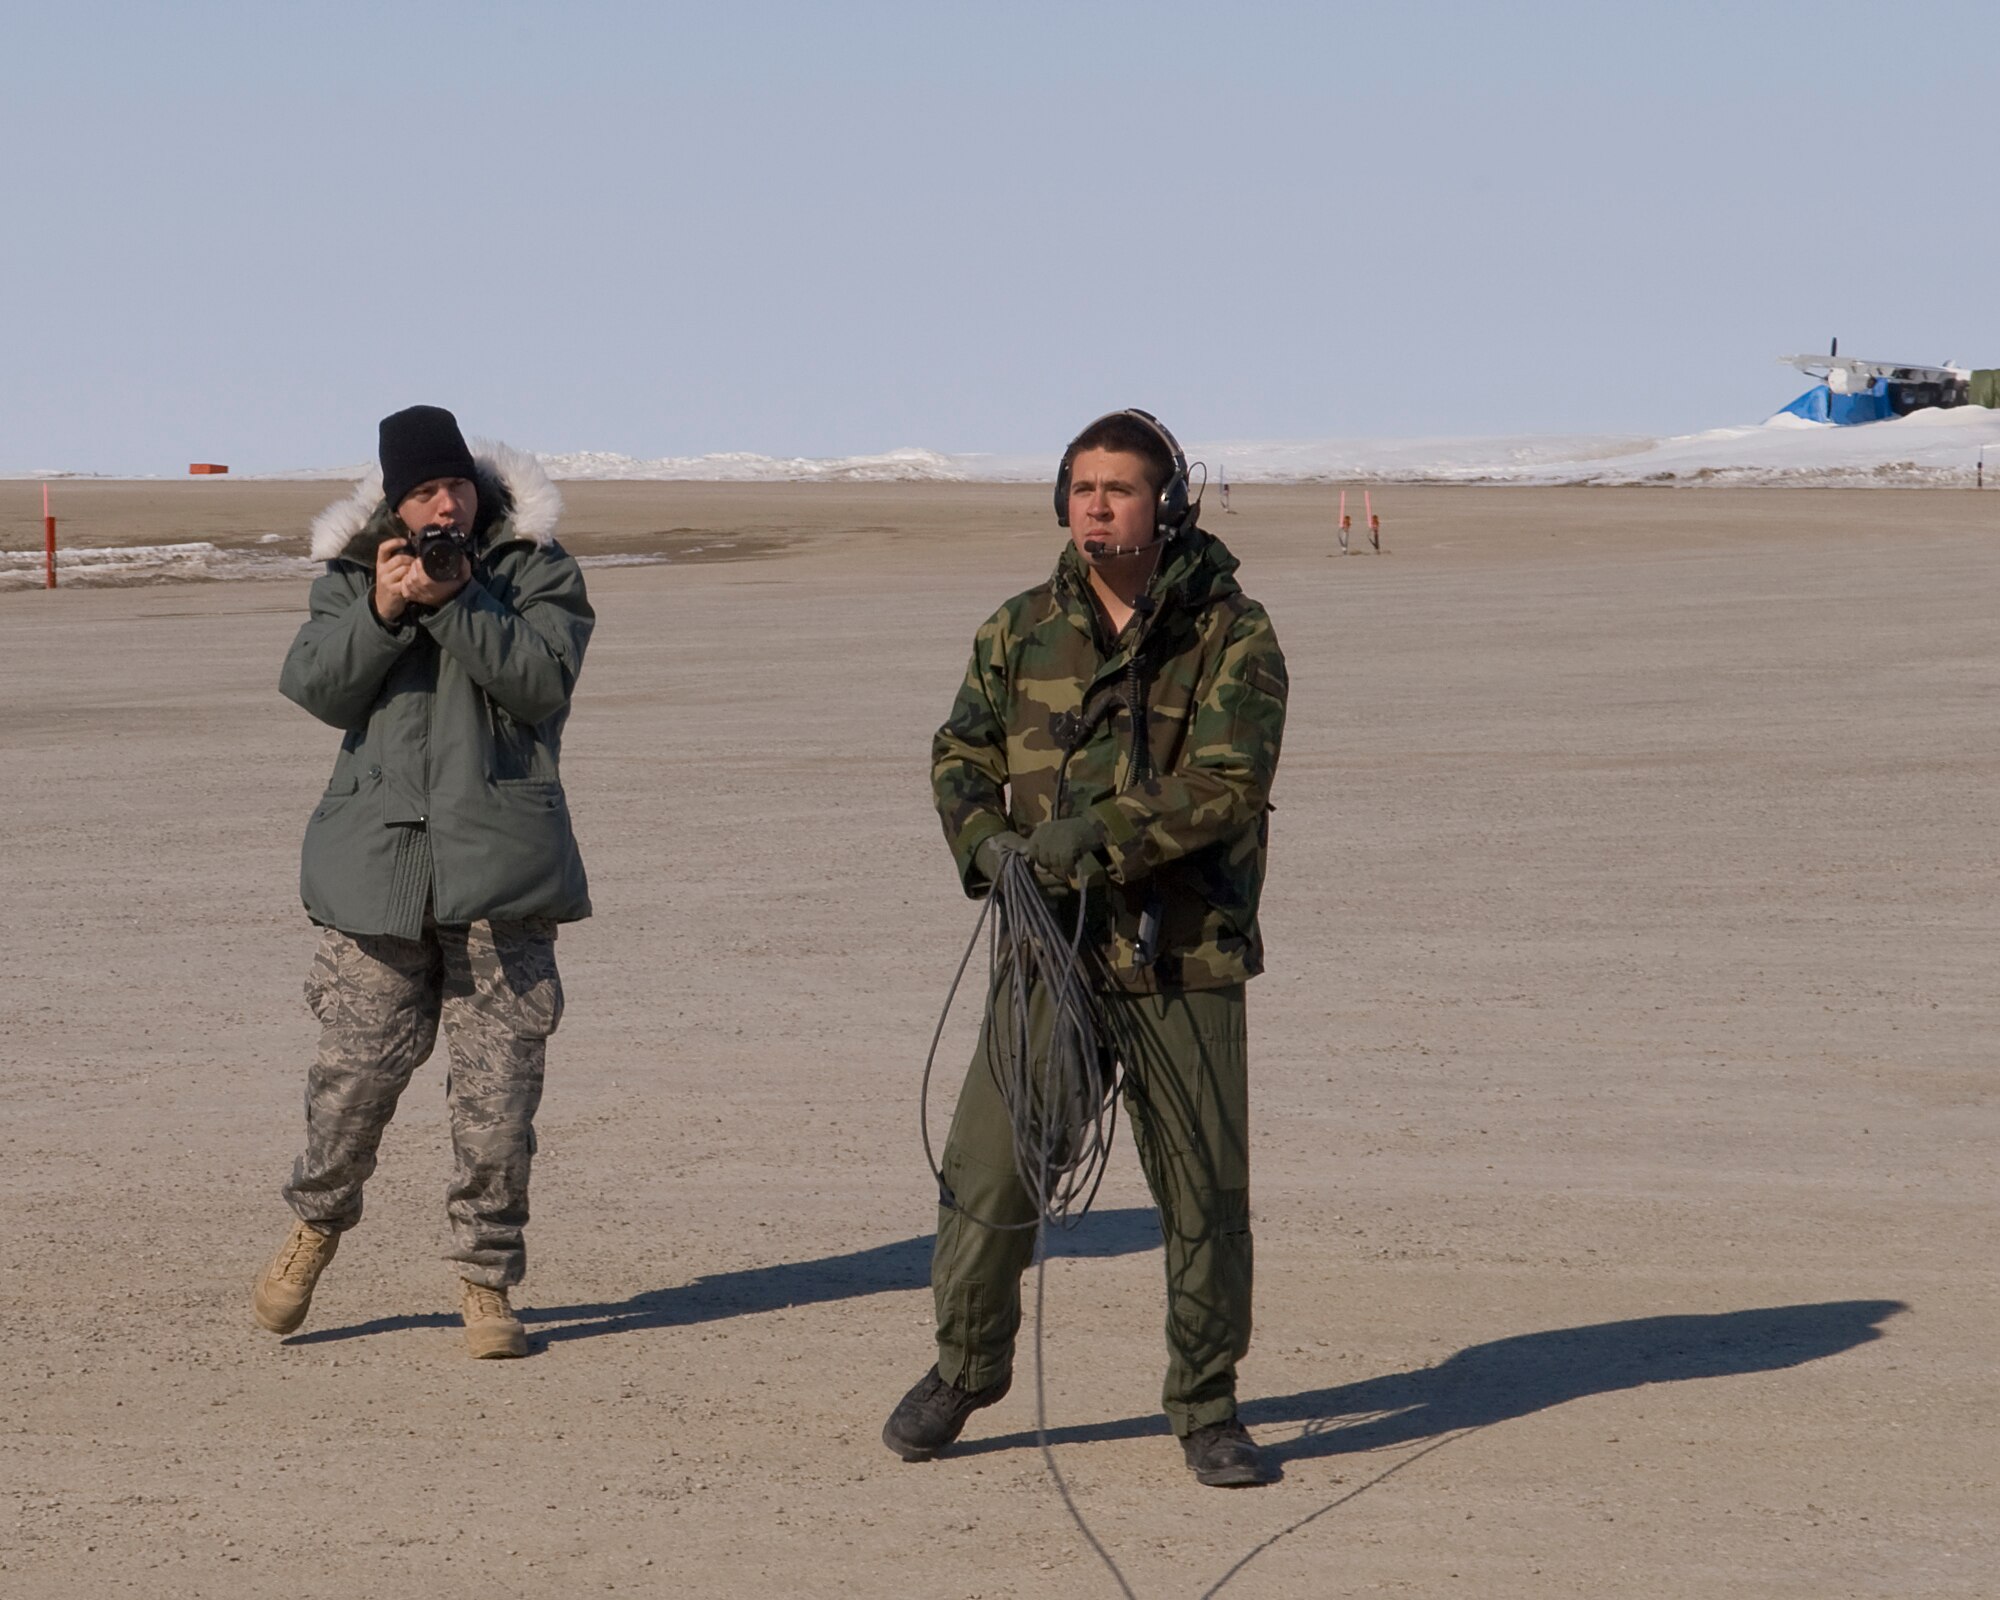 Tech. Sgt. Erik Gudmundson (left) a photojournalist with the 133rd Airlift Wing, pauses to take a photo of Senior Airman Corey Drabelis, 109th Airlift Squadron loadmaster as he sets to launch a Minnesota Air National Guard C-130 Hercules cargo aircraft in Cambridge Bay, Canada on May 29, 2009. The C-130 is delivering much needed supplies and providing transportation of vital equipment to support the Haughton-Mars Project in Resolute (HMP), Canada. HMP supports an exploration program aimed at developing new technologies, strategies, human's factors experience, and field-based operational know-how key to planning the future exploration of the Moon and Mars.
U.S. Air Force Photo by Senior Master Sgt. Mark Moss